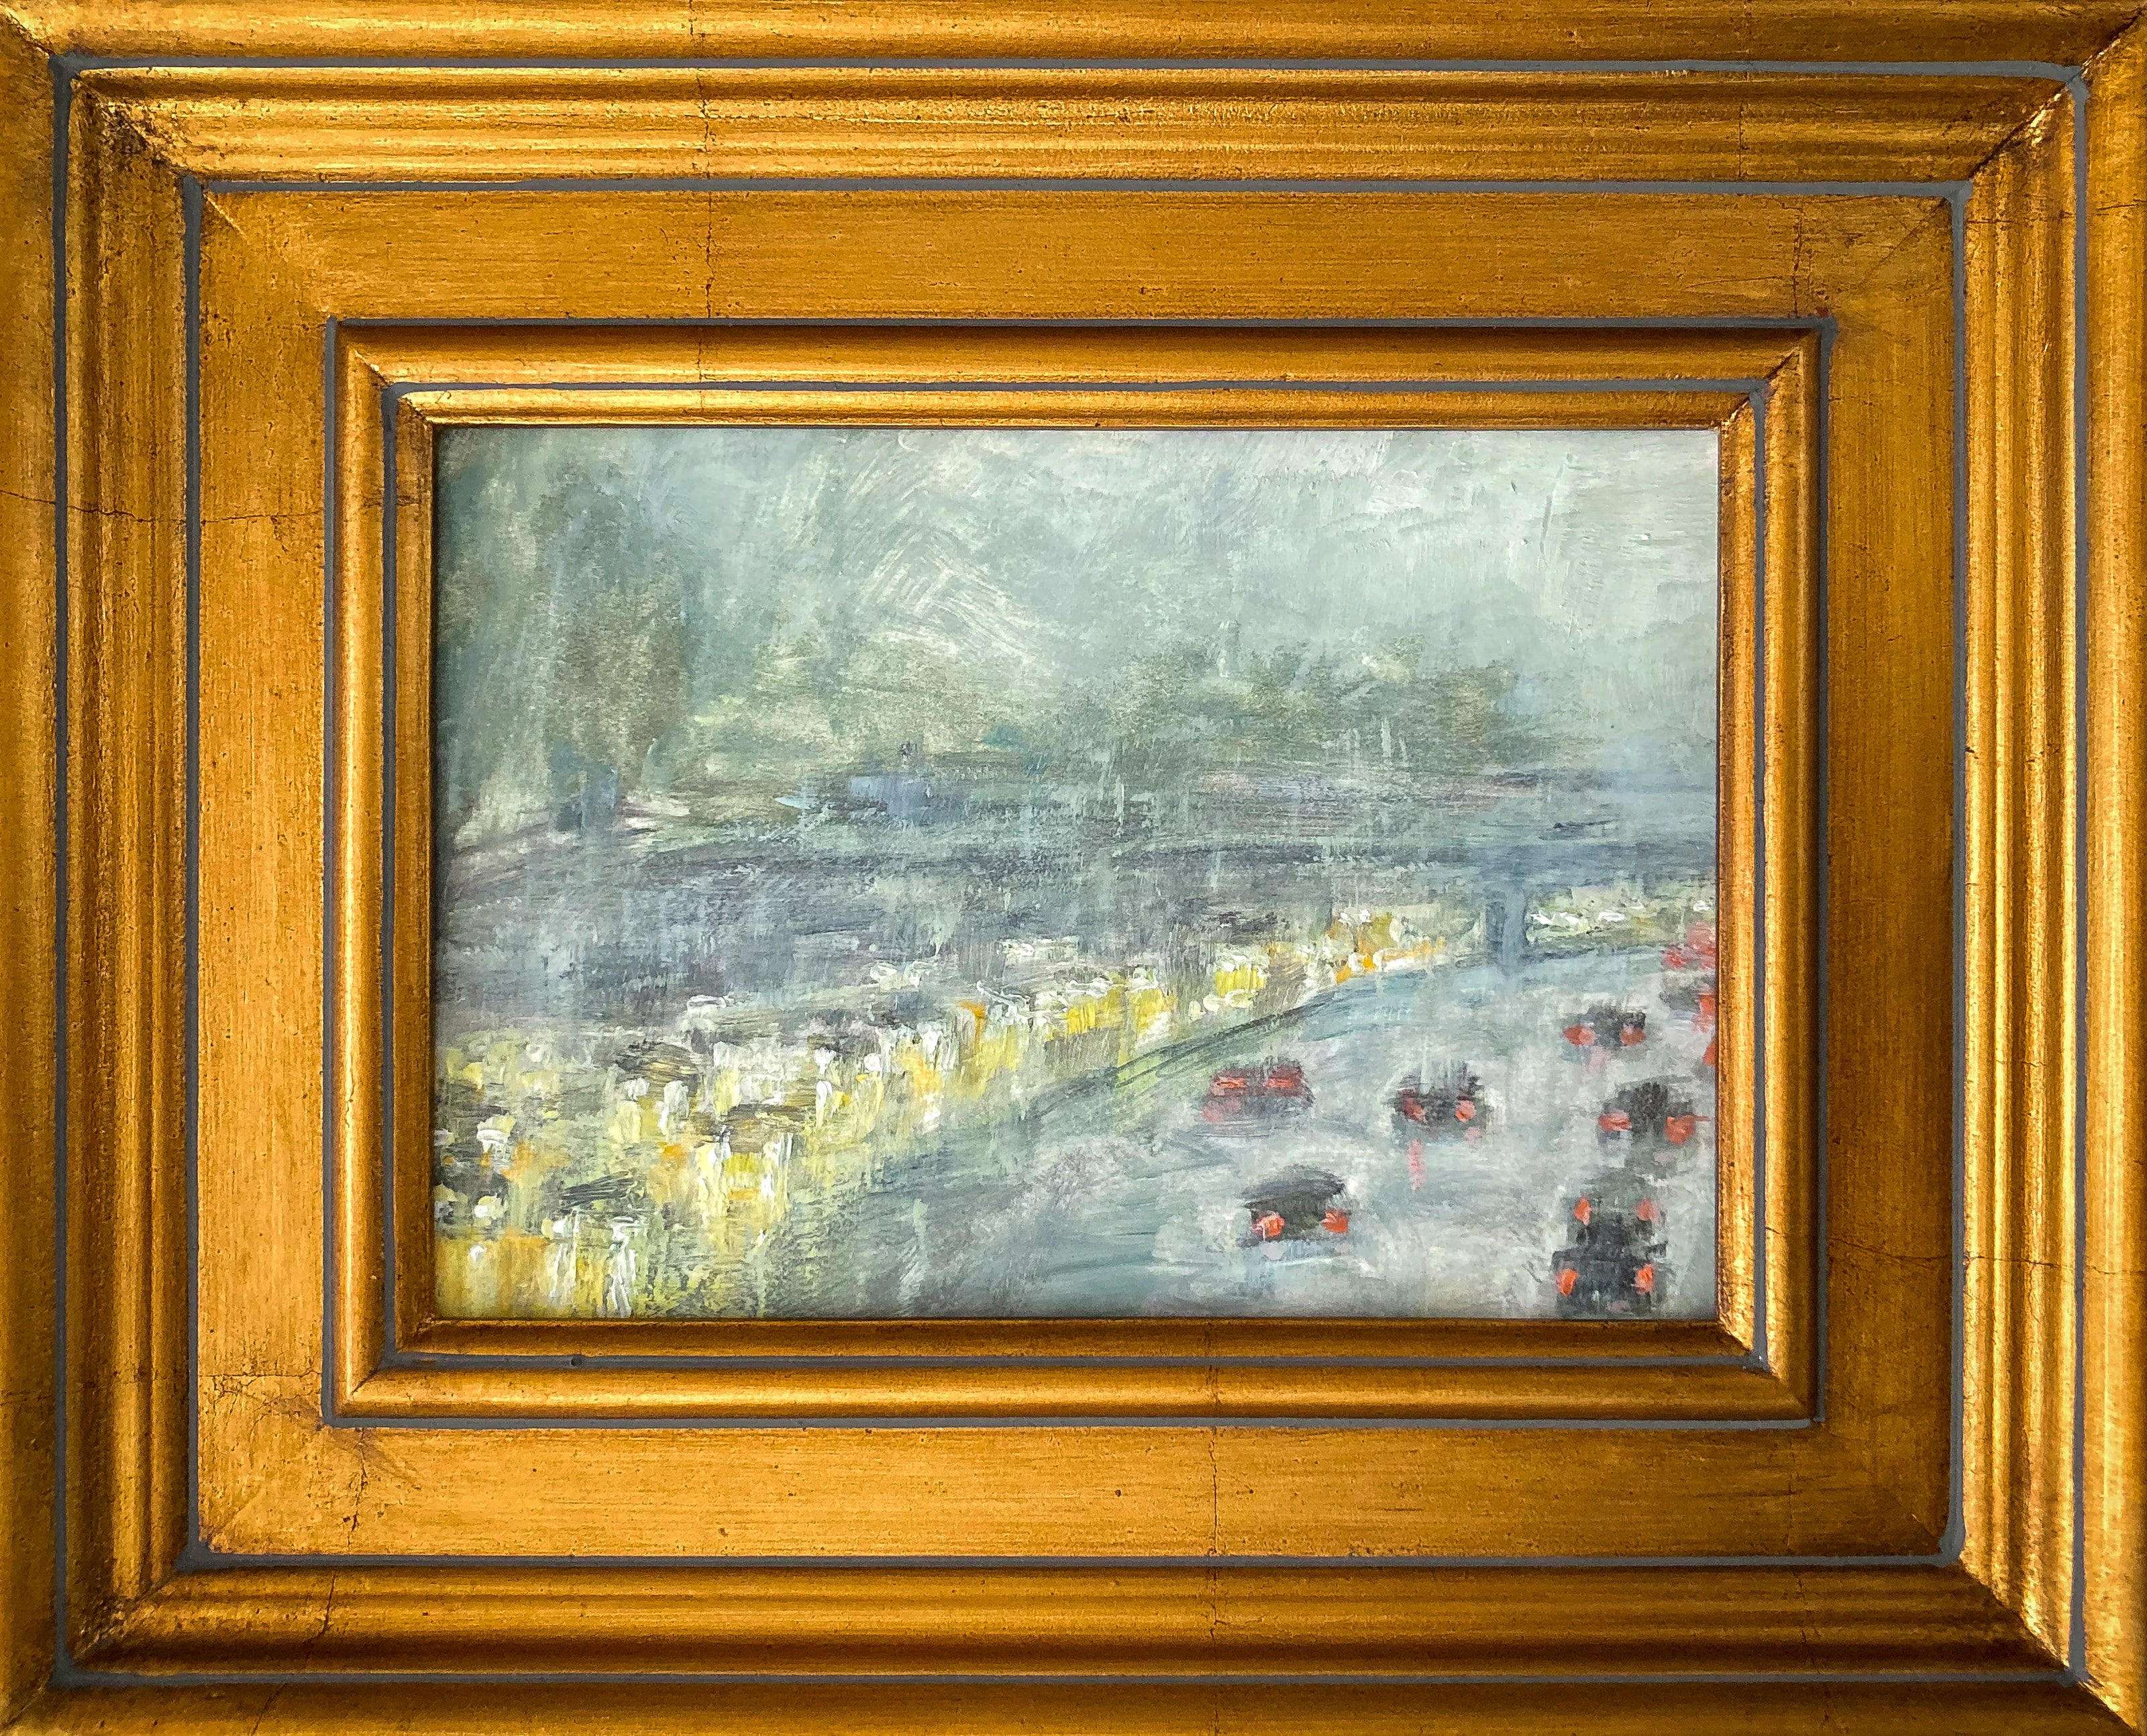 Oil on paper painting; impressionistic view of traffic w/red tail lights and headlights in mist/rain; 5"x7" w/wood gold gild frame; artist E. E. Jacks